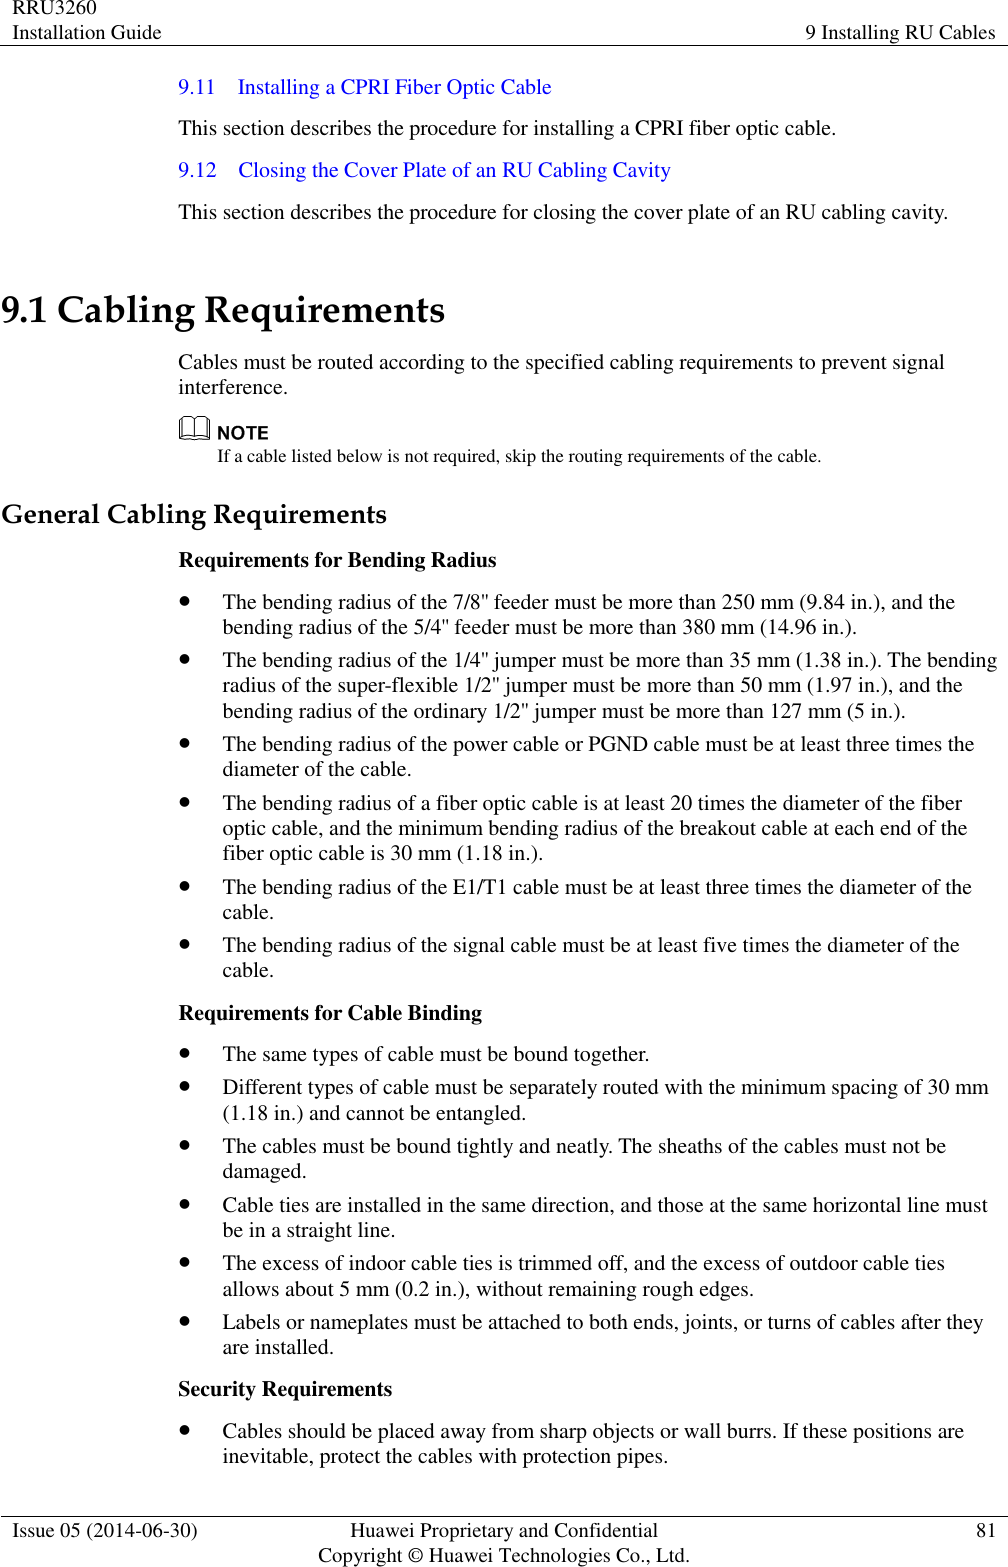 RRU3260 Installation Guide 9 Installing RU Cables  Issue 05 (2014-06-30) Huawei Proprietary and Confidential                                     Copyright © Huawei Technologies Co., Ltd. 81  9.11    Installing a CPRI Fiber Optic Cable This section describes the procedure for installing a CPRI fiber optic cable. 9.12    Closing the Cover Plate of an RU Cabling Cavity This section describes the procedure for closing the cover plate of an RU cabling cavity. 9.1 Cabling Requirements Cables must be routed according to the specified cabling requirements to prevent signal interference.  If a cable listed below is not required, skip the routing requirements of the cable. General Cabling Requirements Requirements for Bending Radius  The bending radius of the 7/8&apos;&apos; feeder must be more than 250 mm (9.84 in.), and the bending radius of the 5/4&apos;&apos; feeder must be more than 380 mm (14.96 in.).  The bending radius of the 1/4&apos;&apos; jumper must be more than 35 mm (1.38 in.). The bending radius of the super-flexible 1/2&apos;&apos; jumper must be more than 50 mm (1.97 in.), and the bending radius of the ordinary 1/2&apos;&apos; jumper must be more than 127 mm (5 in.).  The bending radius of the power cable or PGND cable must be at least three times the diameter of the cable.  The bending radius of a fiber optic cable is at least 20 times the diameter of the fiber optic cable, and the minimum bending radius of the breakout cable at each end of the fiber optic cable is 30 mm (1.18 in.).  The bending radius of the E1/T1 cable must be at least three times the diameter of the cable.  The bending radius of the signal cable must be at least five times the diameter of the cable. Requirements for Cable Binding  The same types of cable must be bound together.  Different types of cable must be separately routed with the minimum spacing of 30 mm (1.18 in.) and cannot be entangled.  The cables must be bound tightly and neatly. The sheaths of the cables must not be damaged.  Cable ties are installed in the same direction, and those at the same horizontal line must be in a straight line.  The excess of indoor cable ties is trimmed off, and the excess of outdoor cable ties allows about 5 mm (0.2 in.), without remaining rough edges.  Labels or nameplates must be attached to both ends, joints, or turns of cables after they are installed. Security Requirements  Cables should be placed away from sharp objects or wall burrs. If these positions are inevitable, protect the cables with protection pipes. 